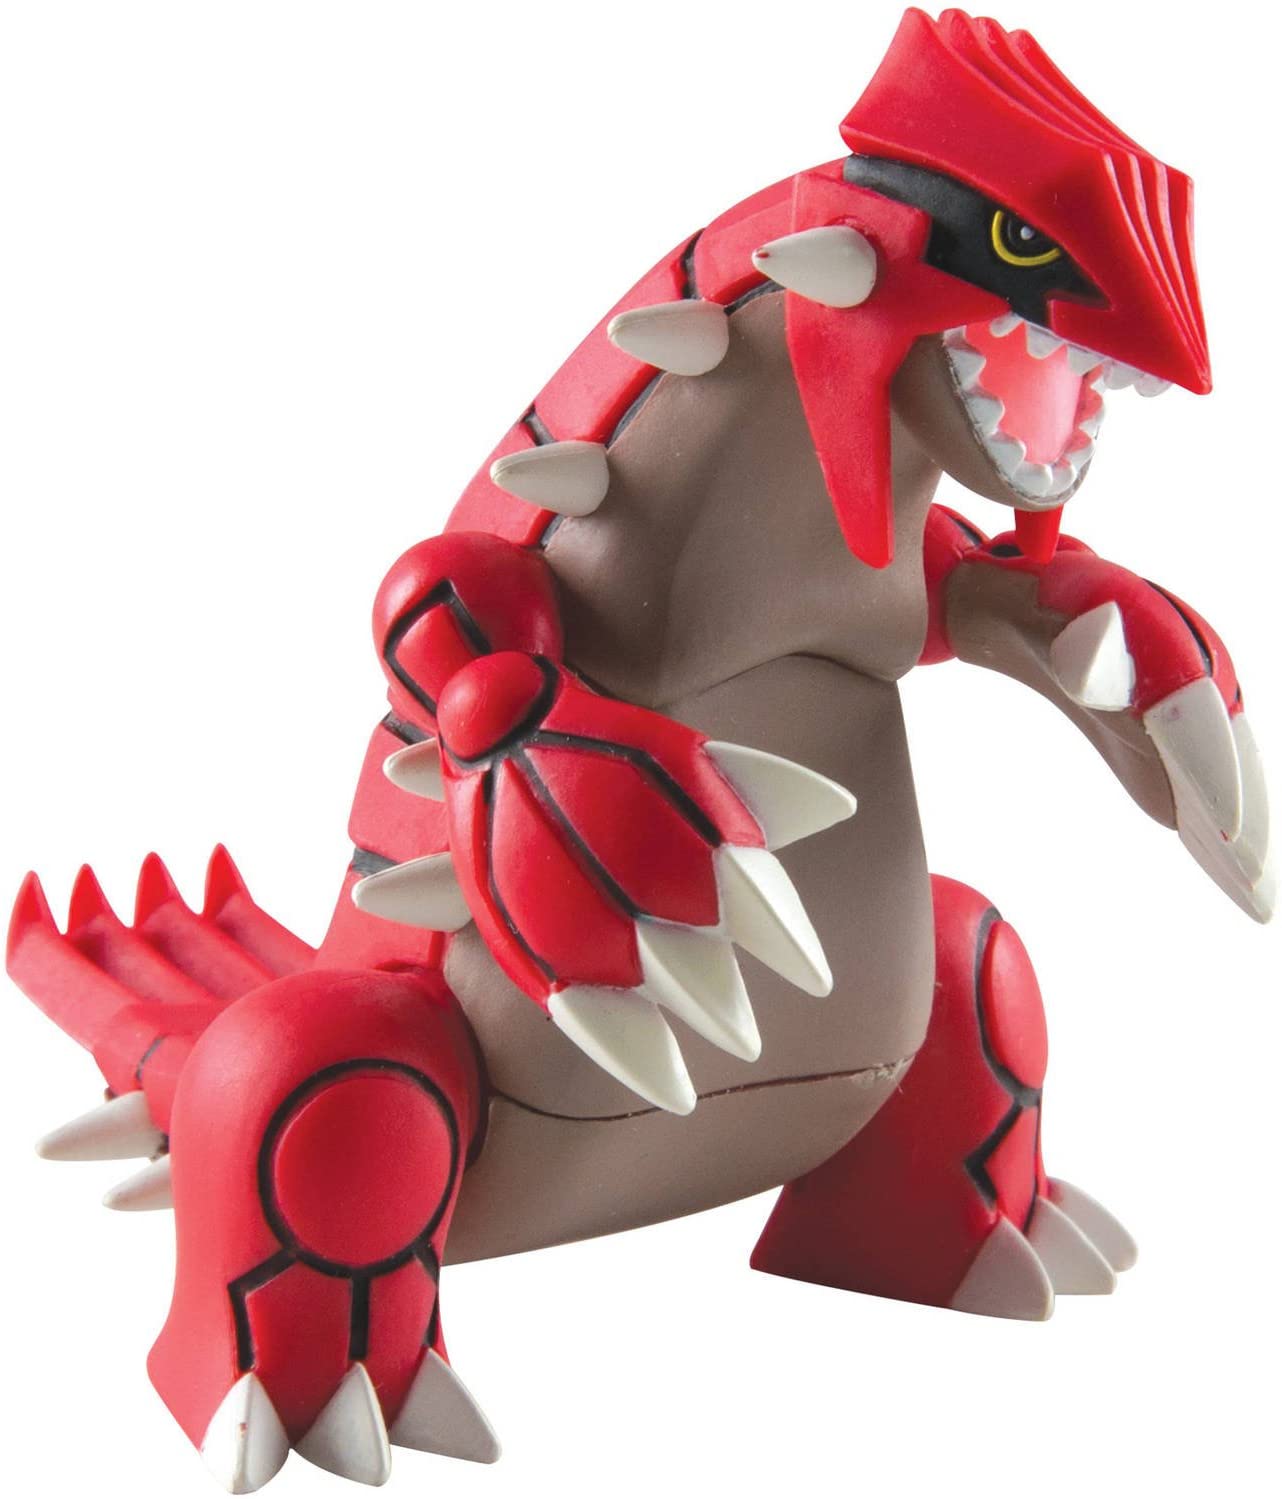 The best Pokemon gifts for kids, Tomy Groudon